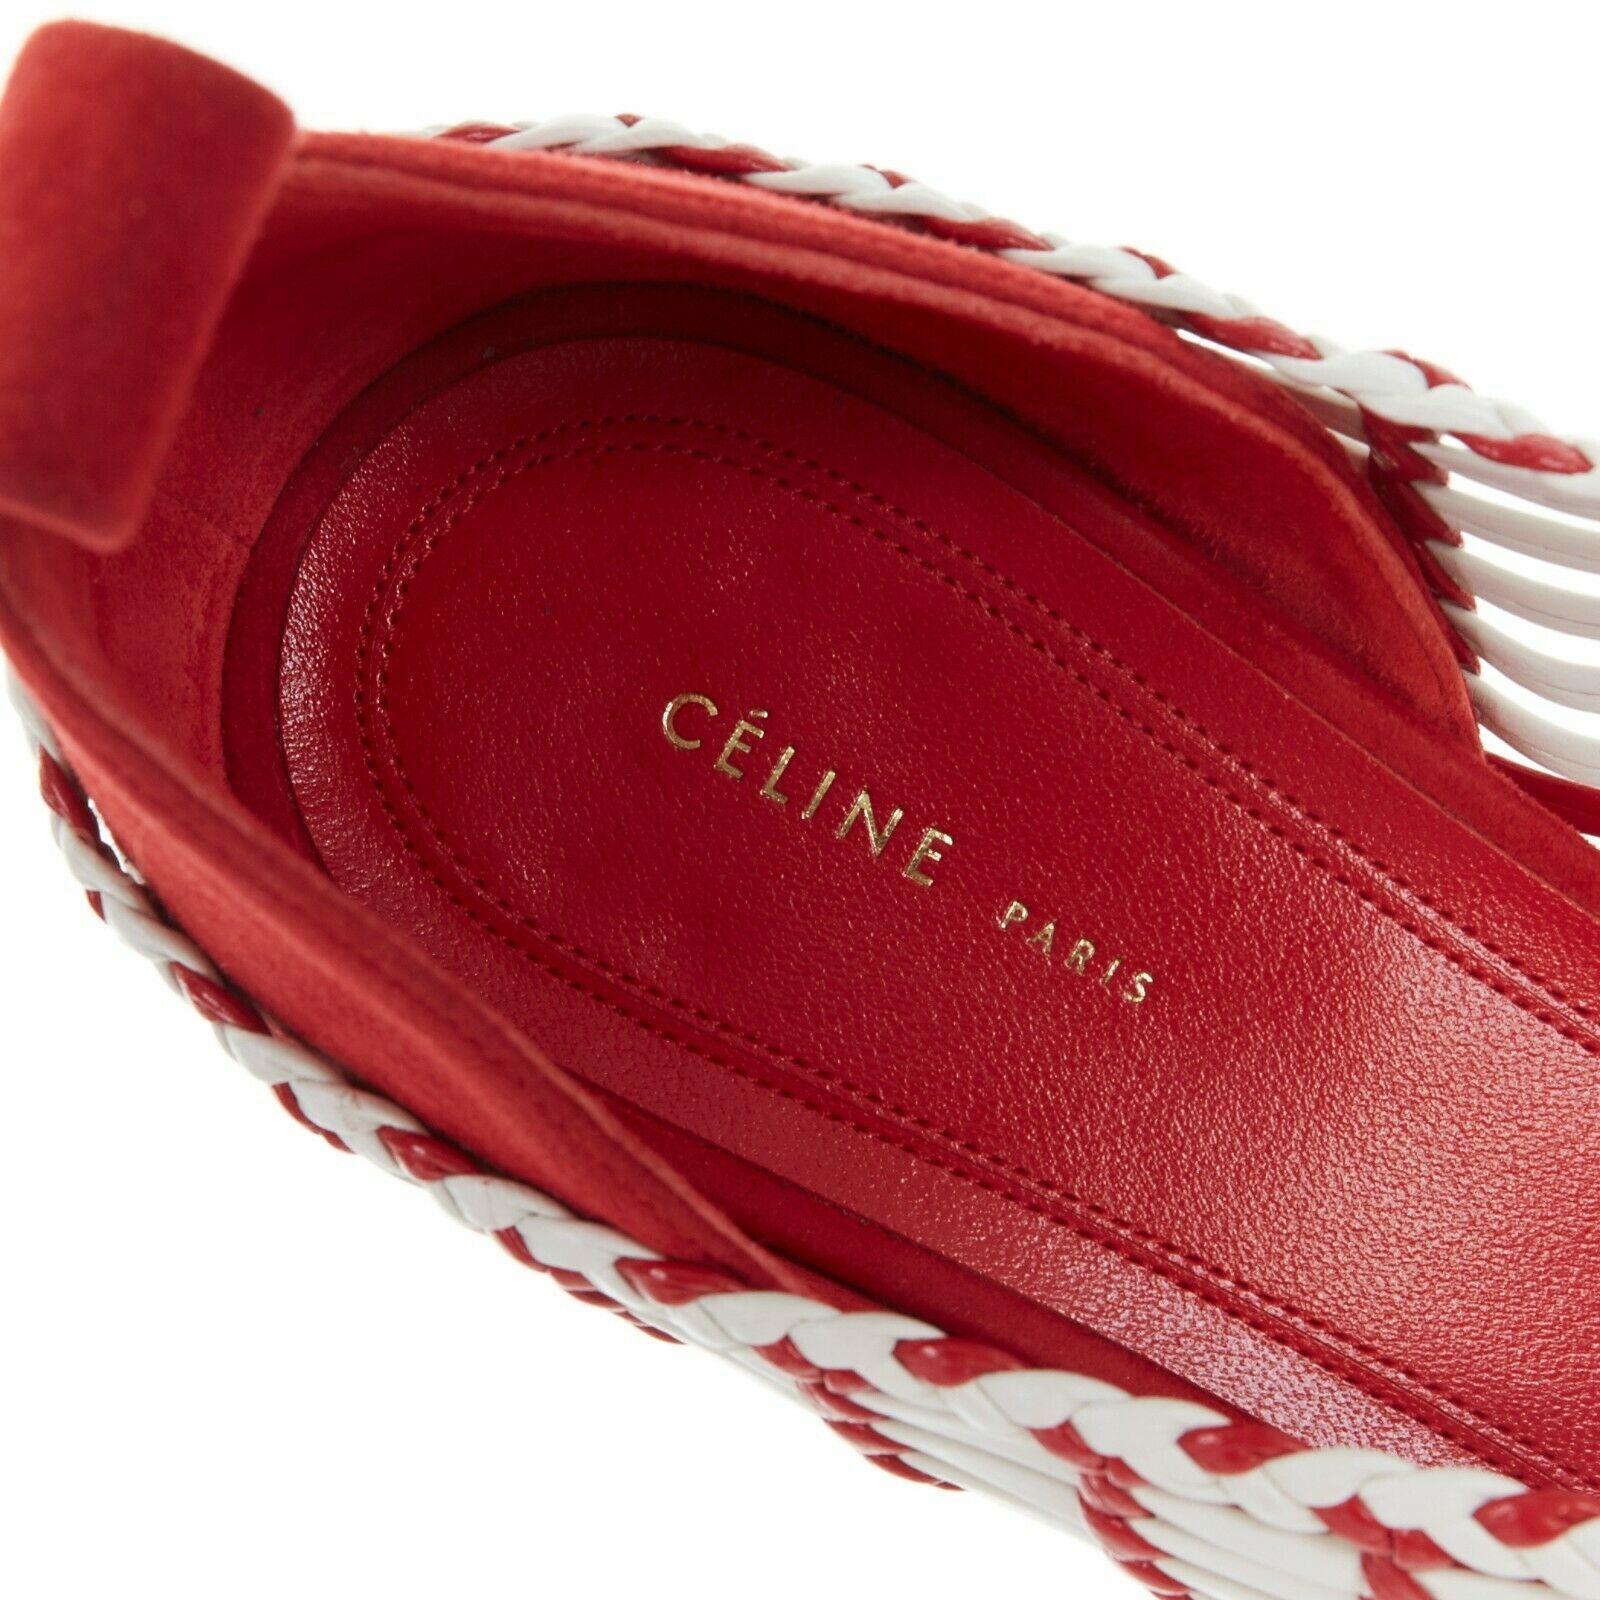 CELINE PHILO red white checkered woven leather pointy kitten hee pumpl EU38 4